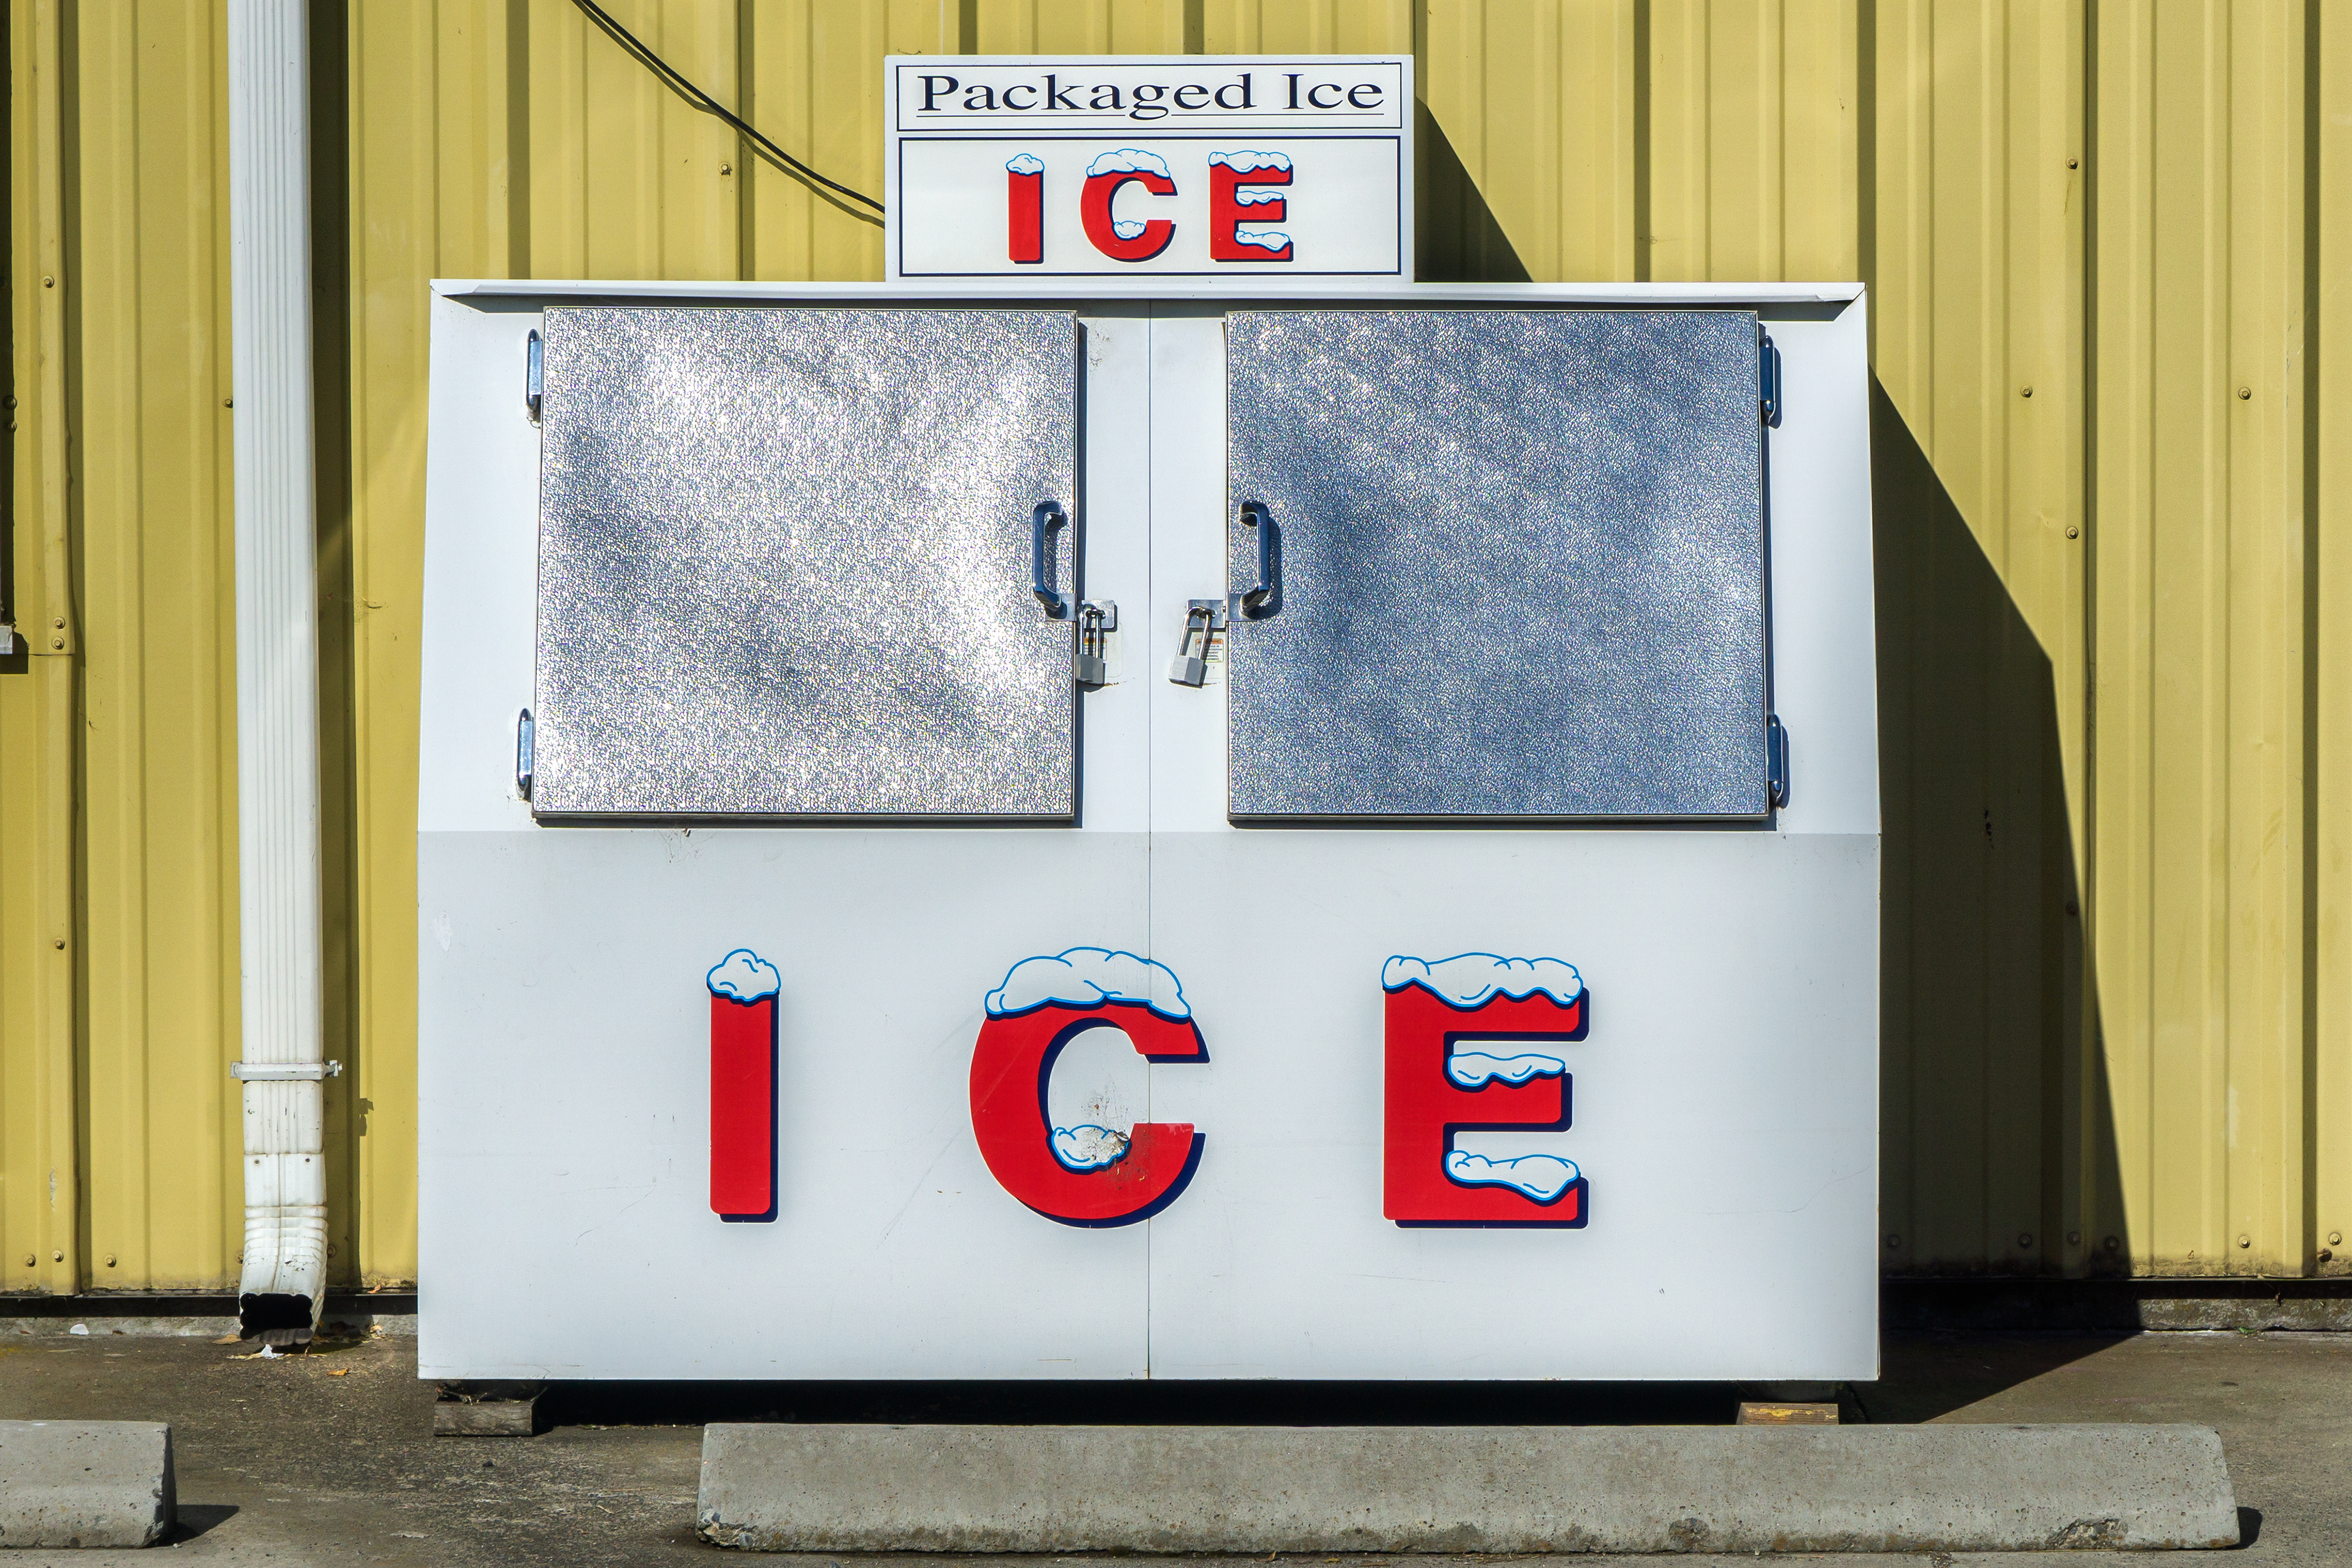 A traditional packaged ice station